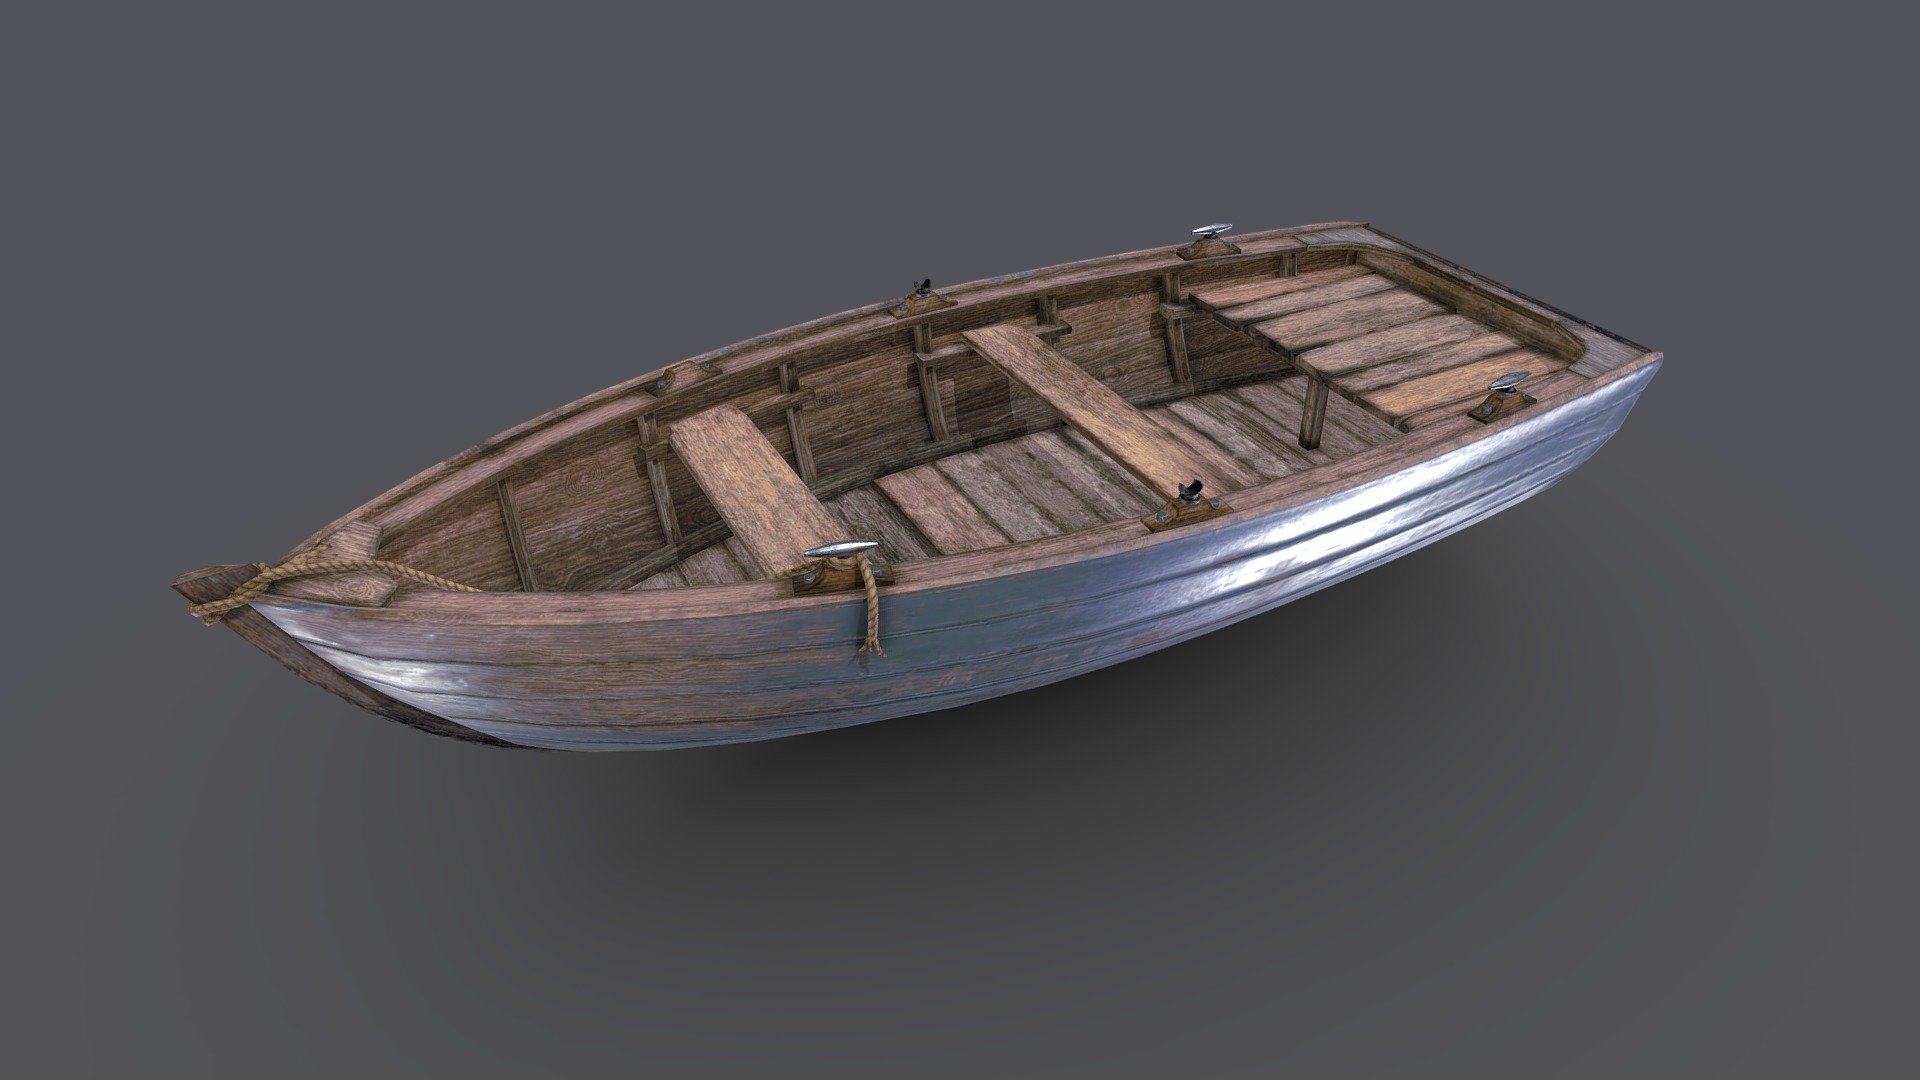 Old Wooden Boat polygons: 2553(4951 tris) verts: 4603




Created in 3ds MAX 2018 no plugins used.

Low-poly (4951 tris) ready to use in games, AR/VR

Textures are in PNG format 2048x2048 PBR metalness 1 set textures

Available formats: MAX 2018 and 2015, OBJ, MTL, FBX, .tbscene.

Files unit: Centimeters

If you need any other file format you can always request it.

All formats include materials and textures.
 - Old Wooden Boat - Buy Royalty Free 3D model by MaX3Dd 3d model